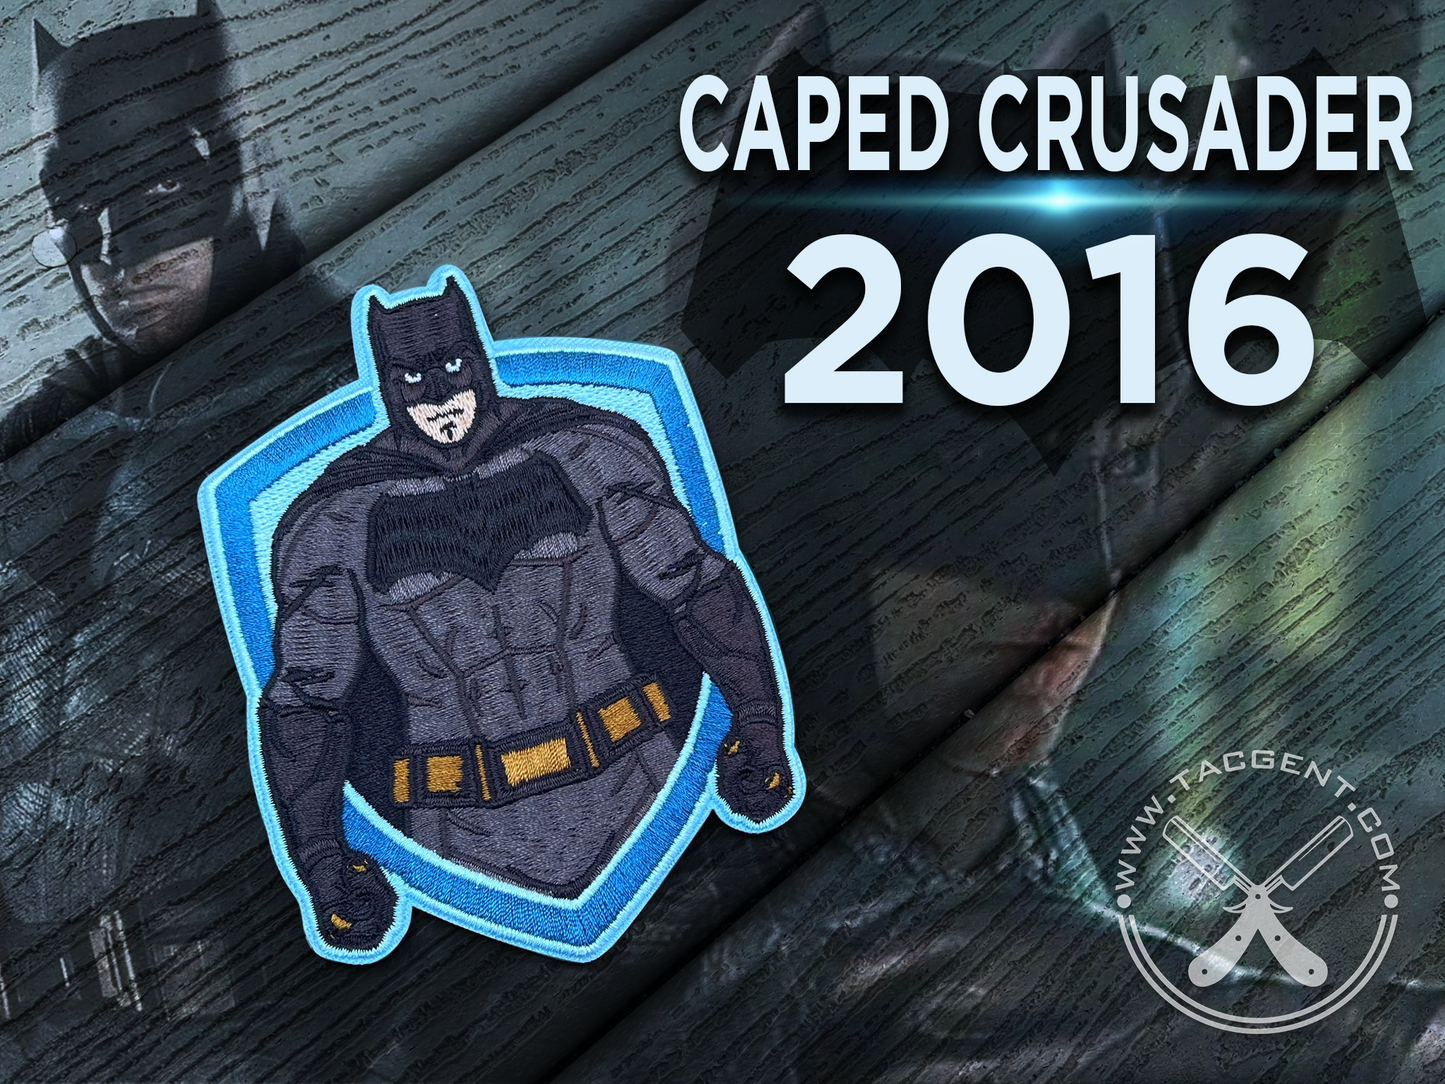 Caped Crusader 2016 Patch